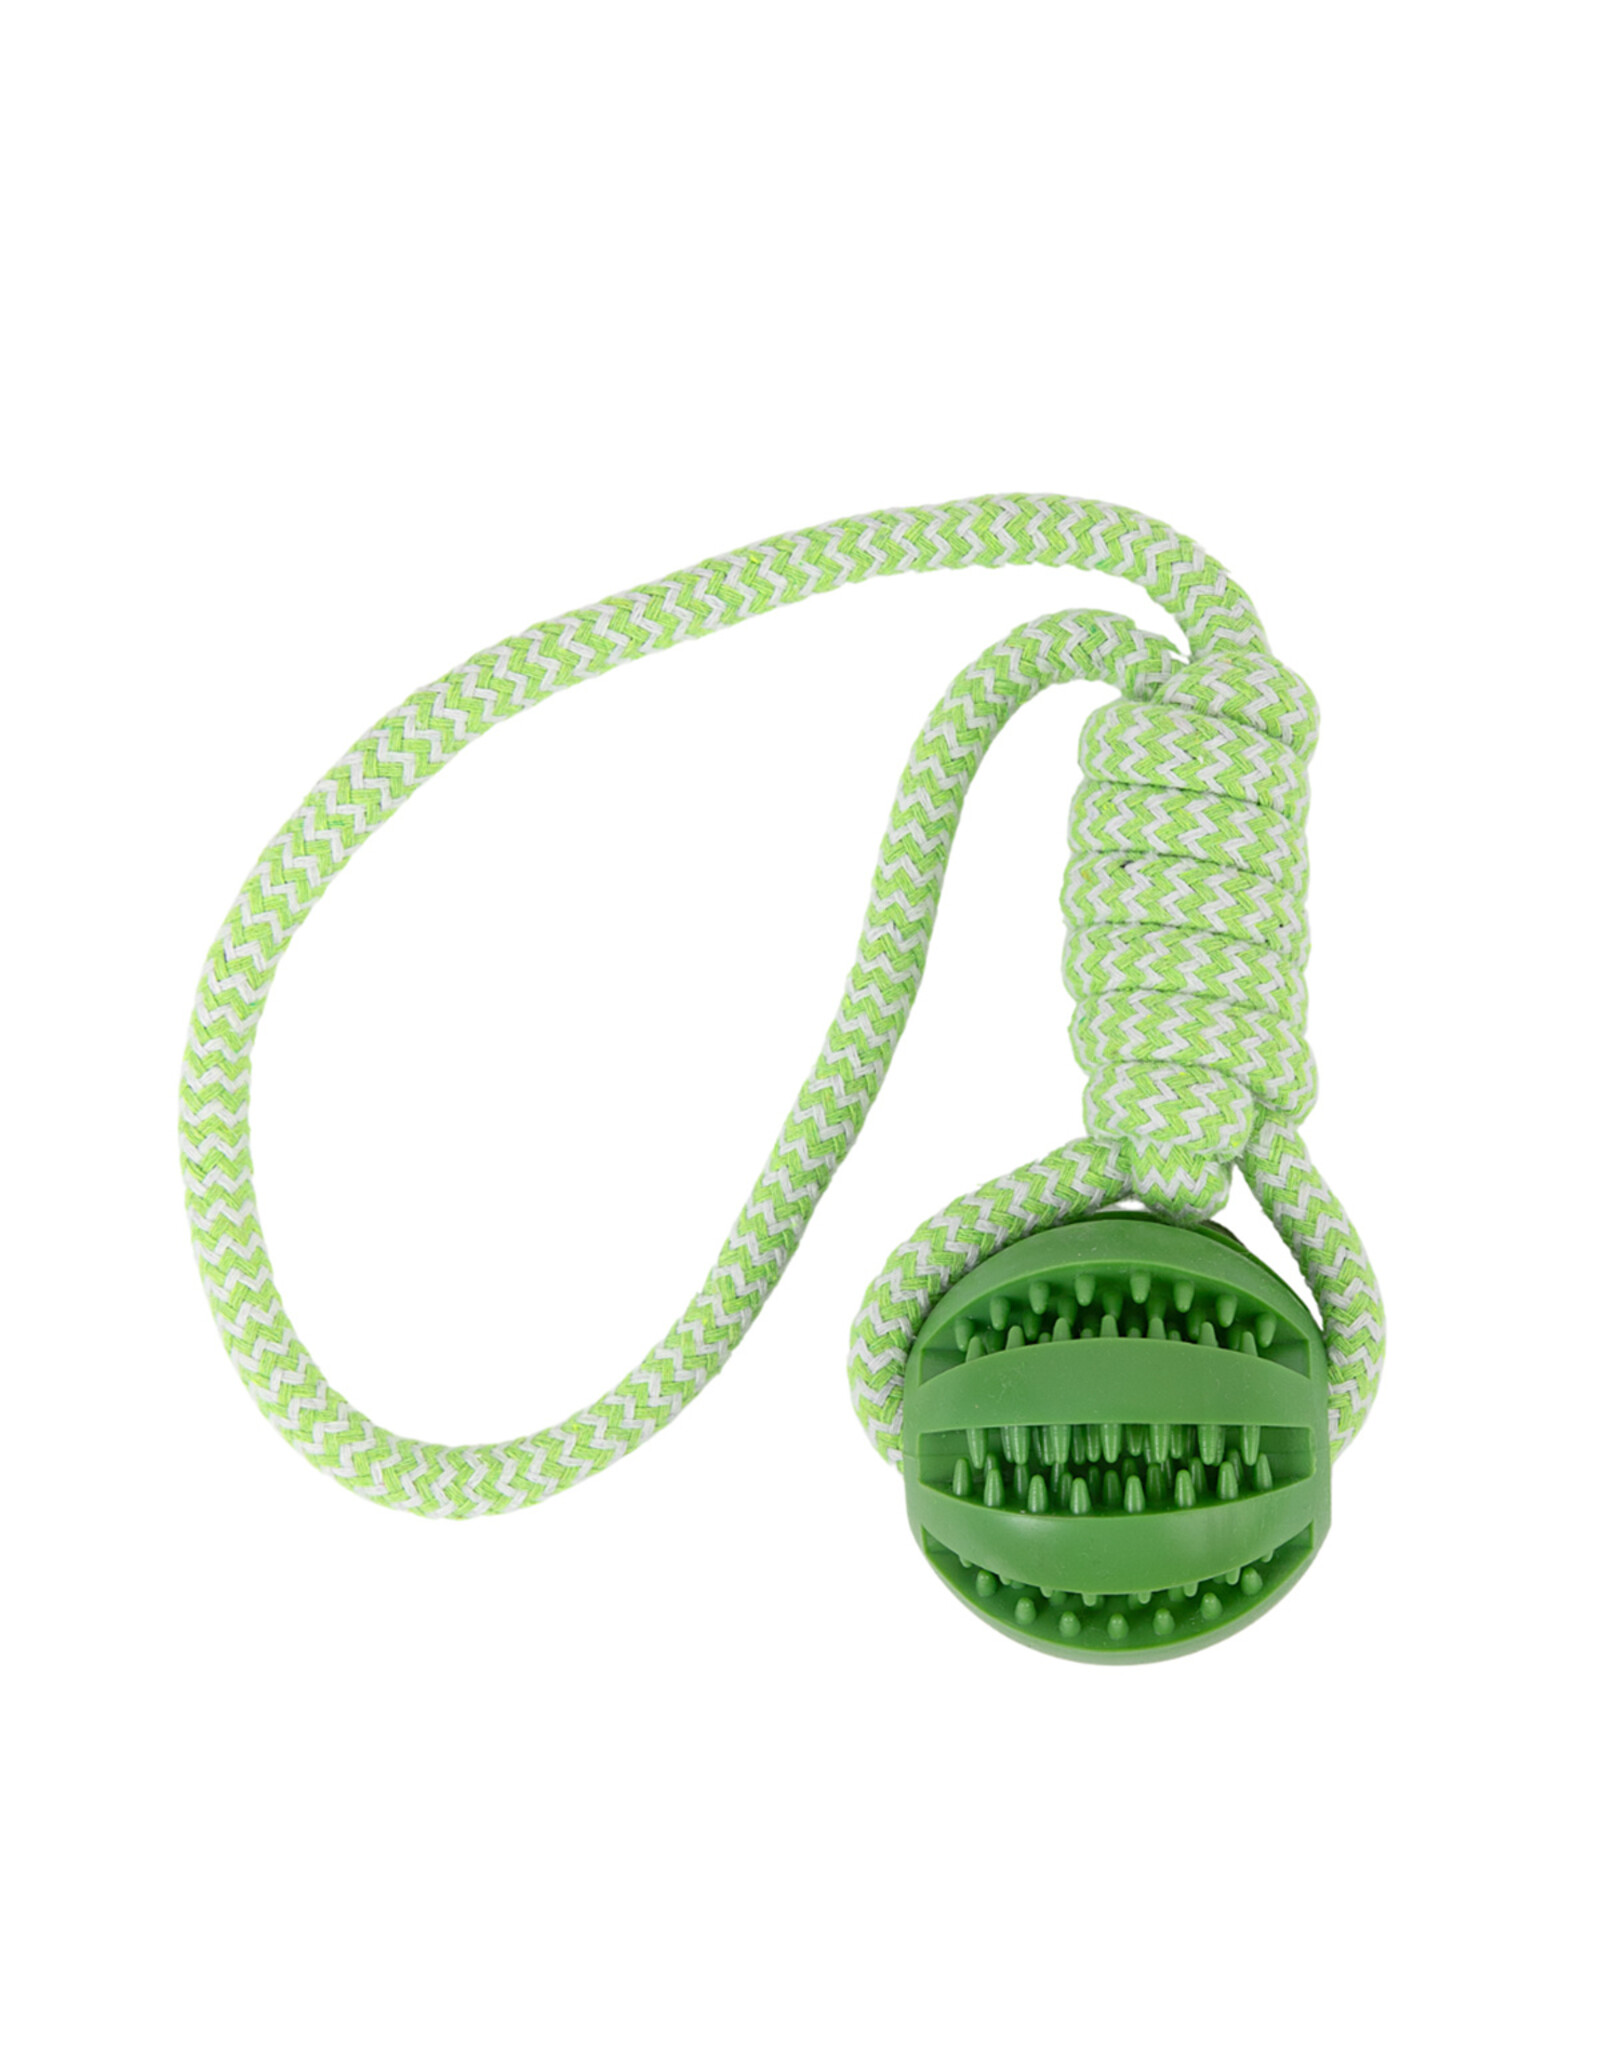 BrookBrand Pets Rubber Ball Rope 2.5in x 14.5in